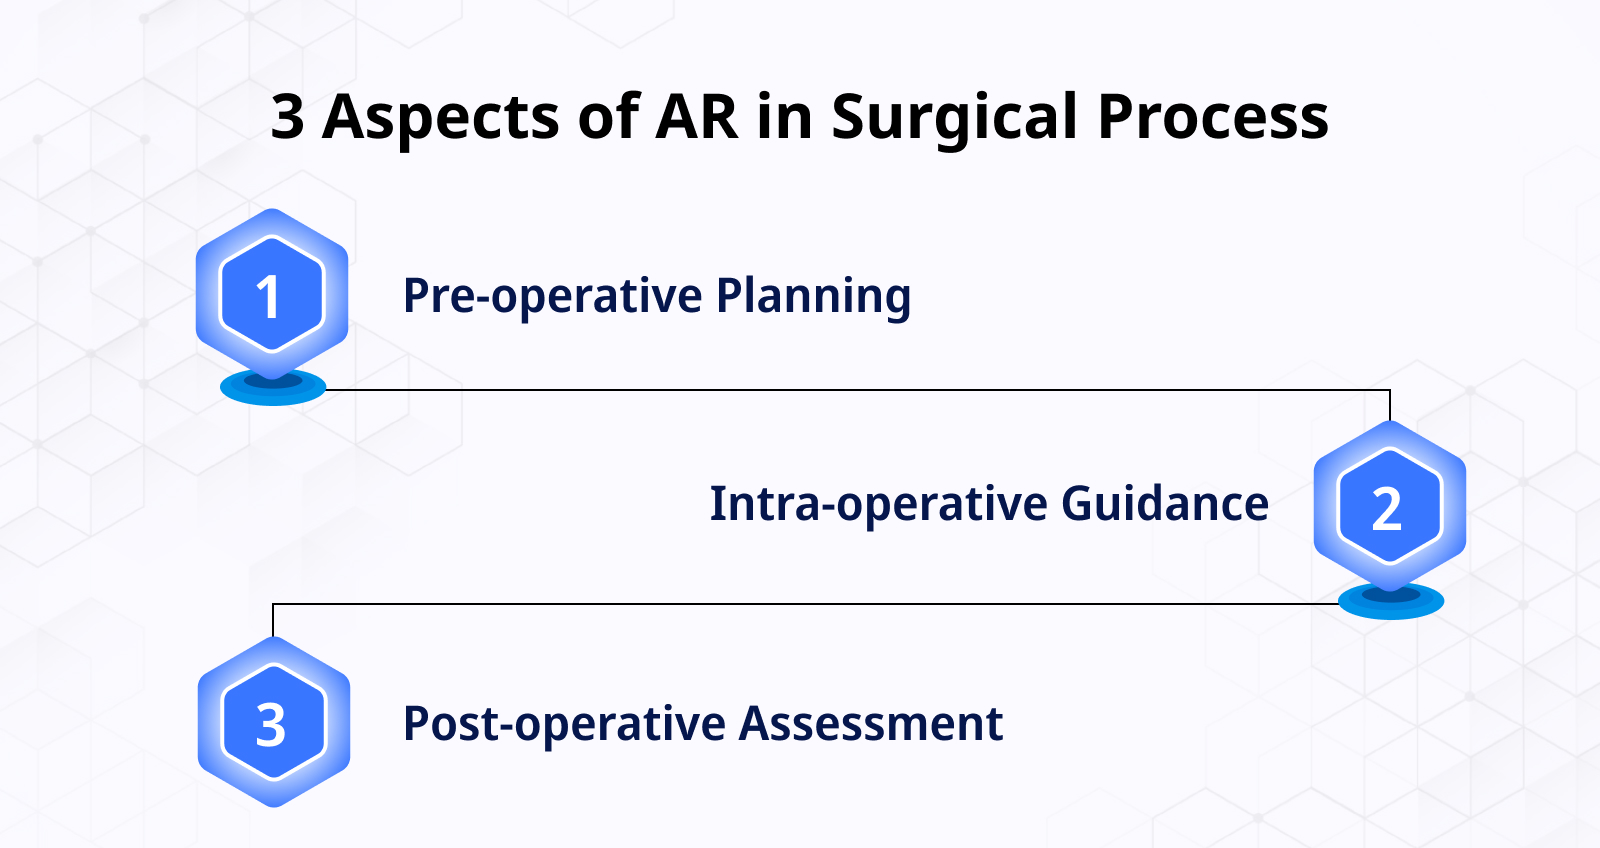 3 Aspects of AR in Surgical Process